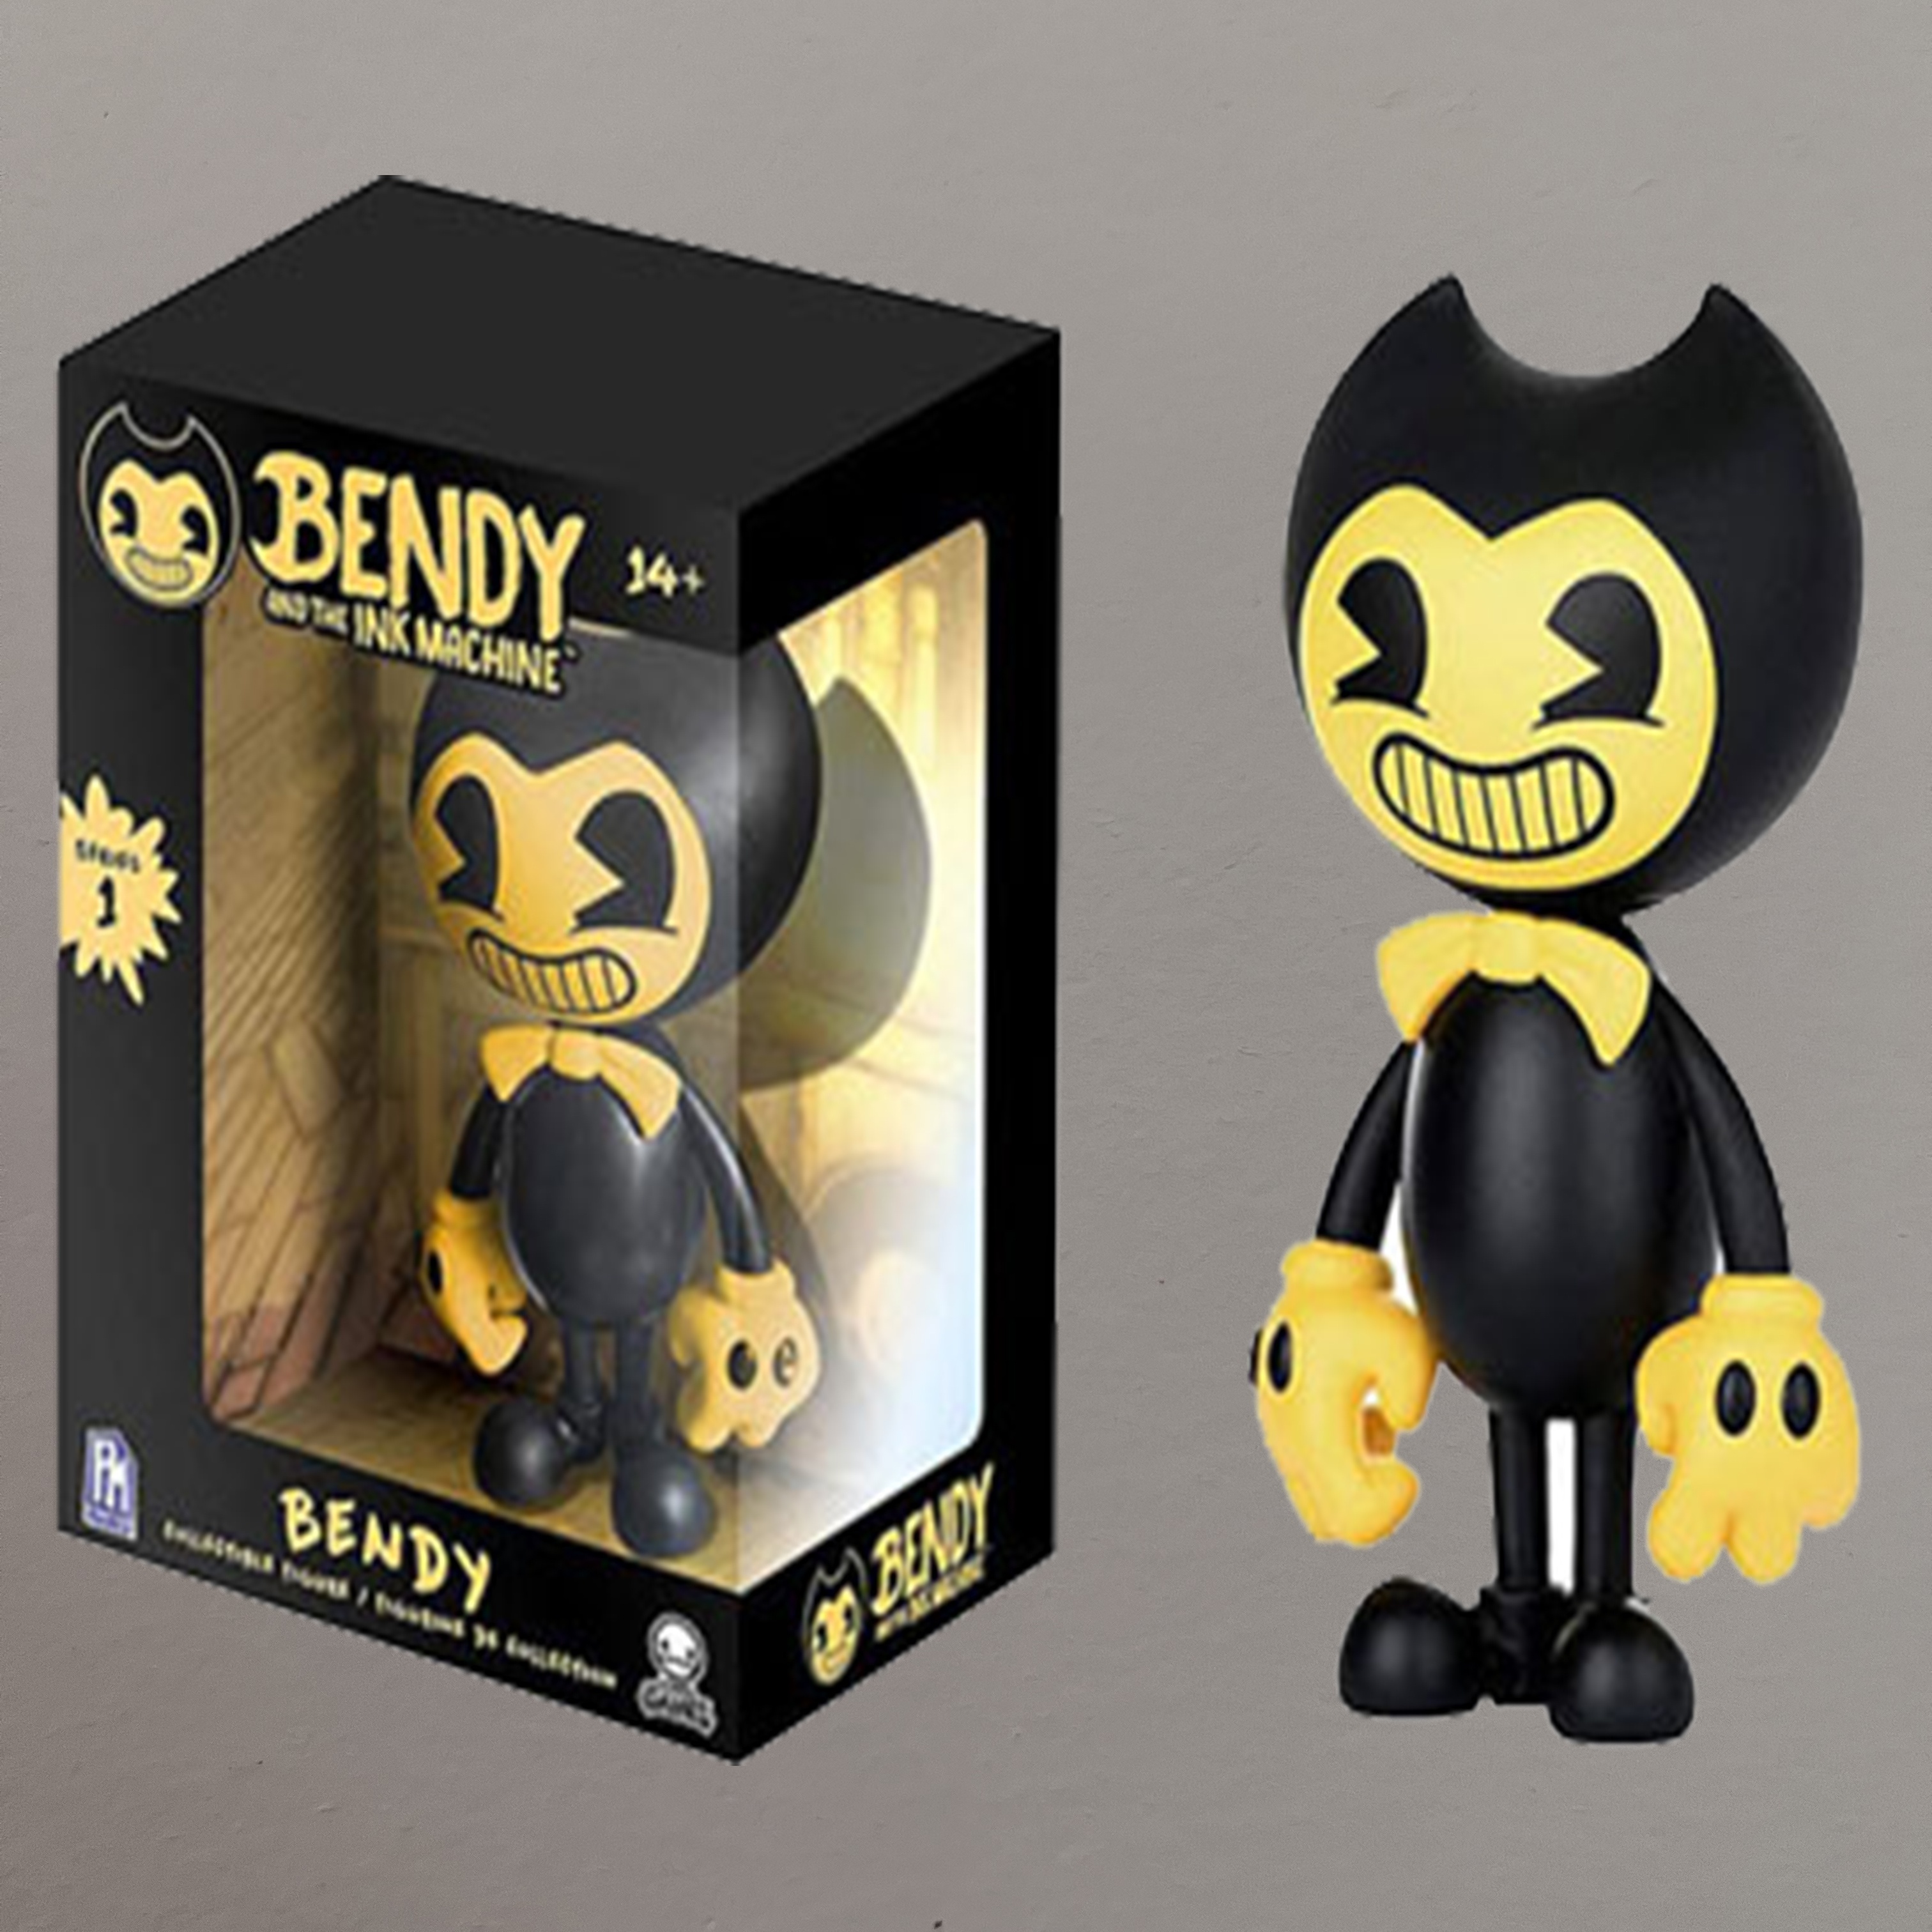 Bendy & the Ink Machine 2 Action Figure 